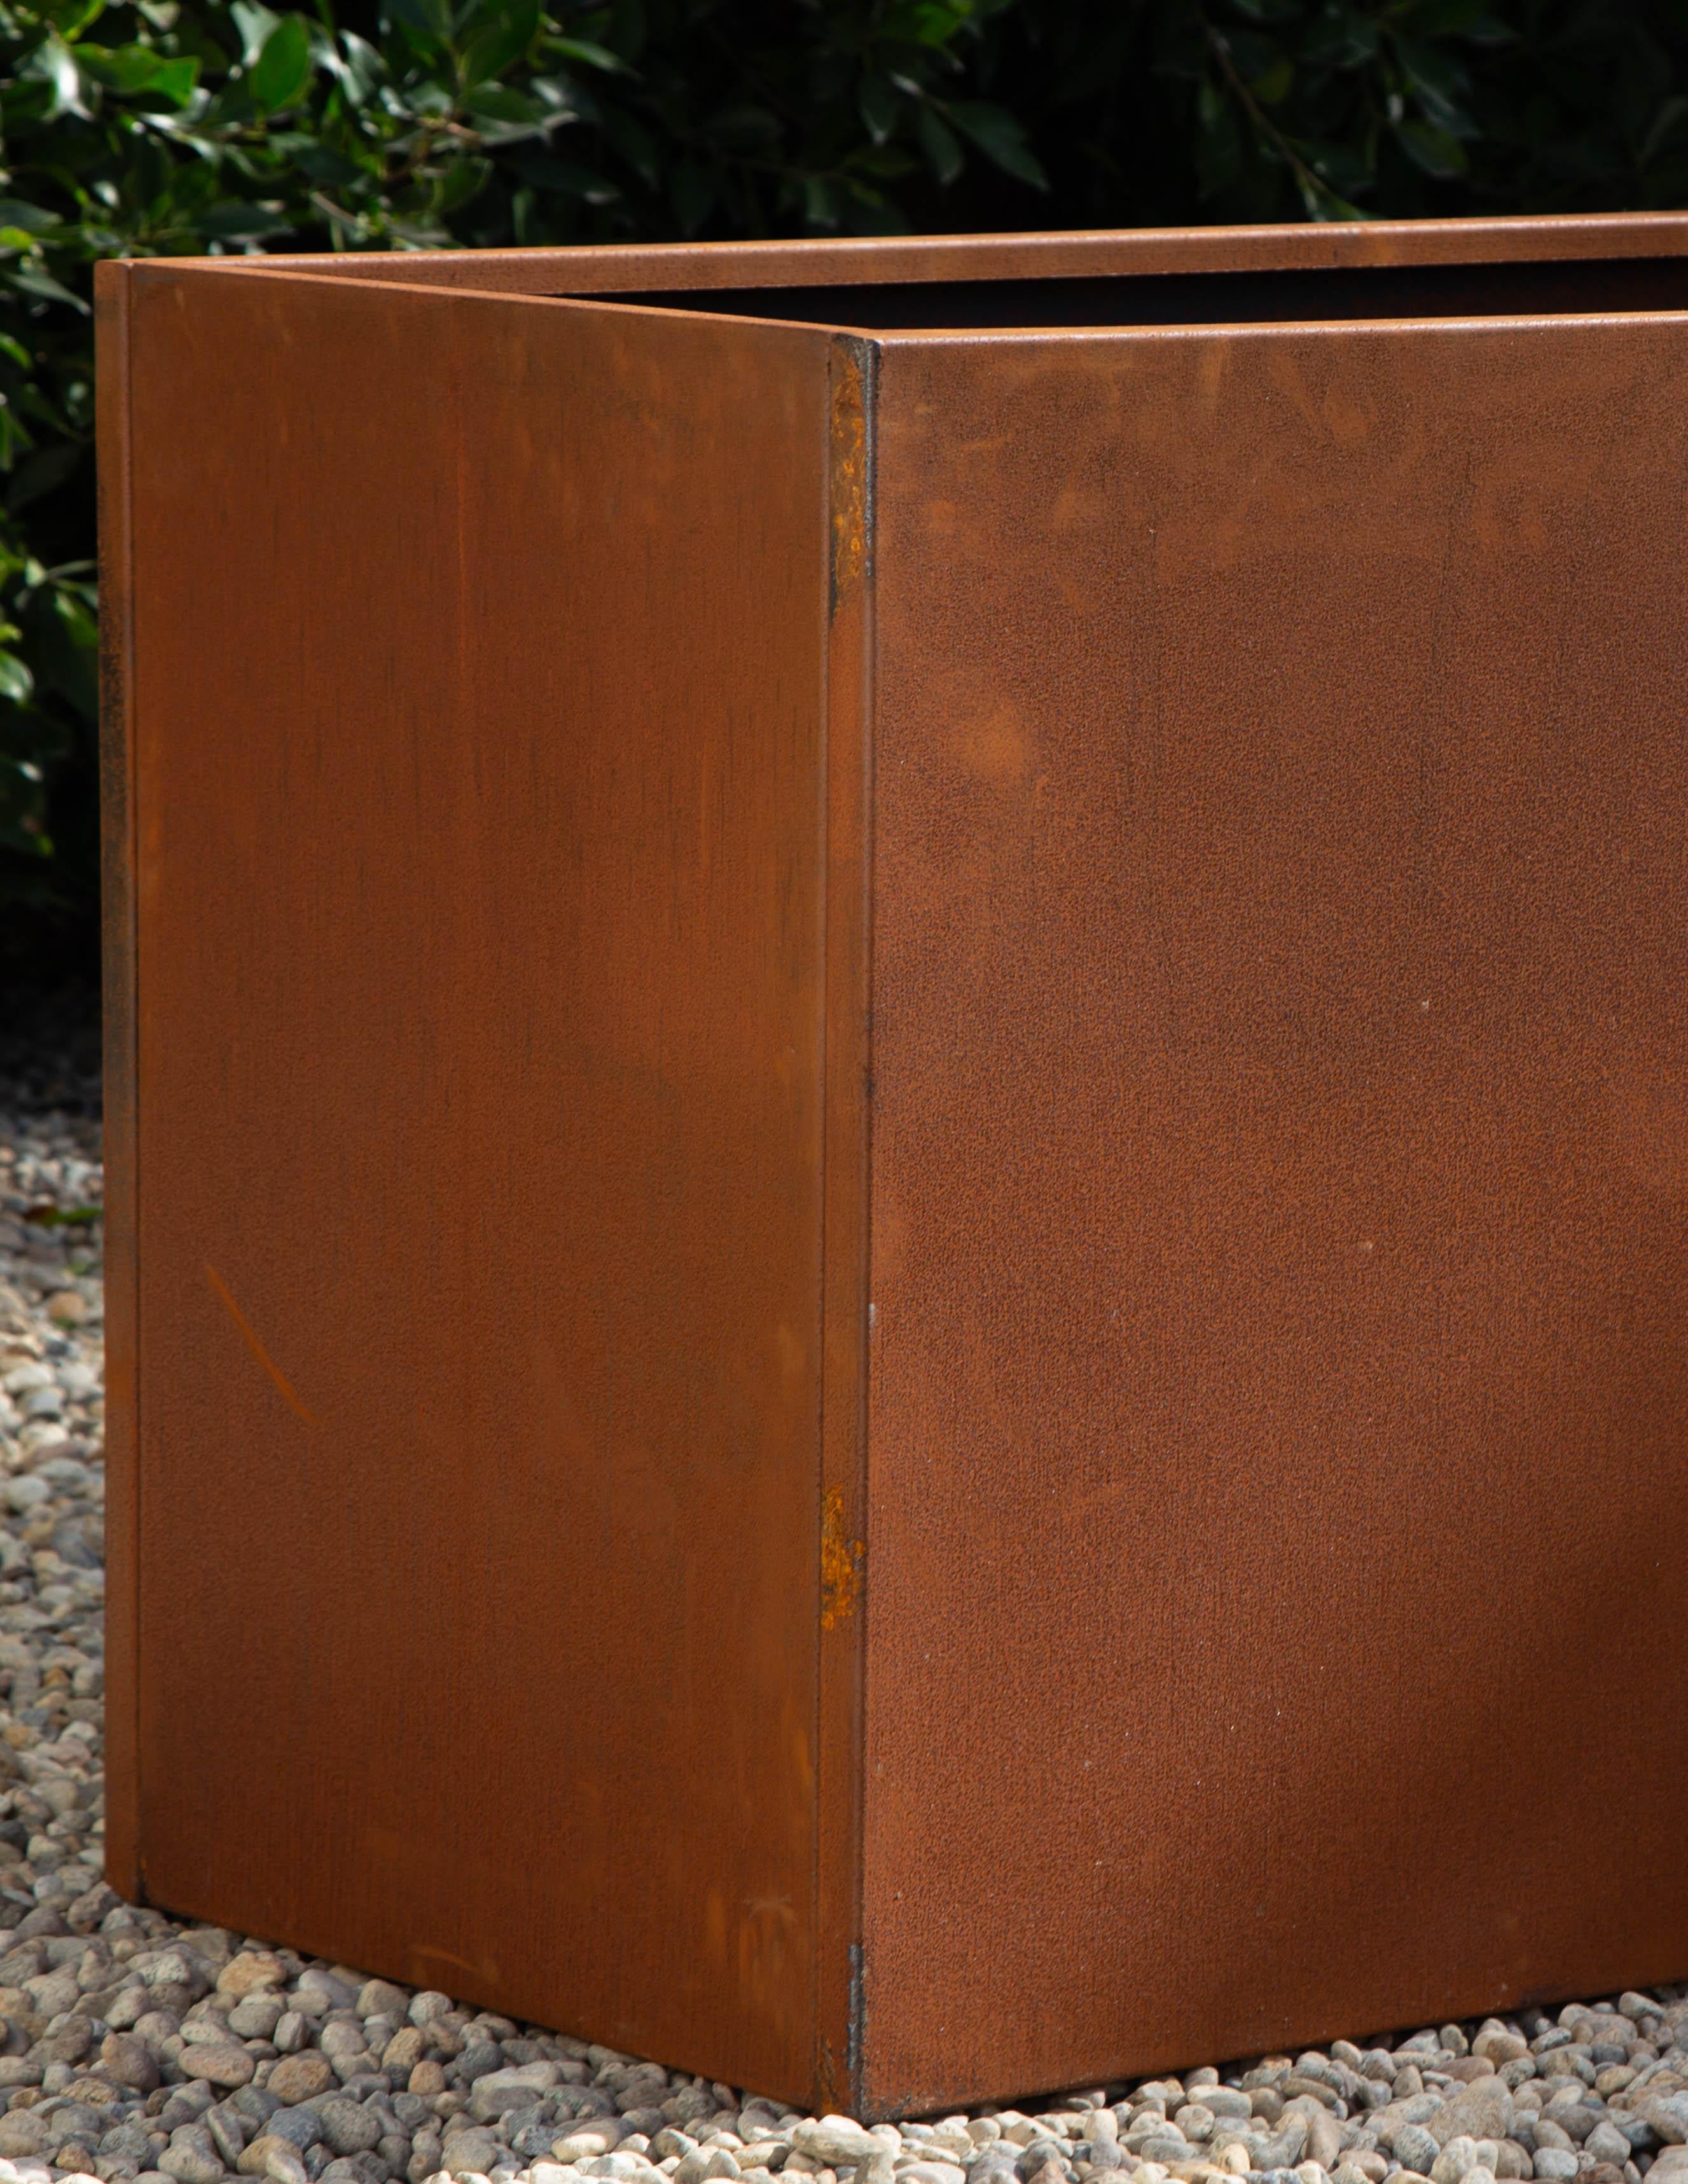 Corten Steel Planter or Edible Garden Box (8' X 3' X 2.5') In Excellent Condition For Sale In West Hollywood, CA